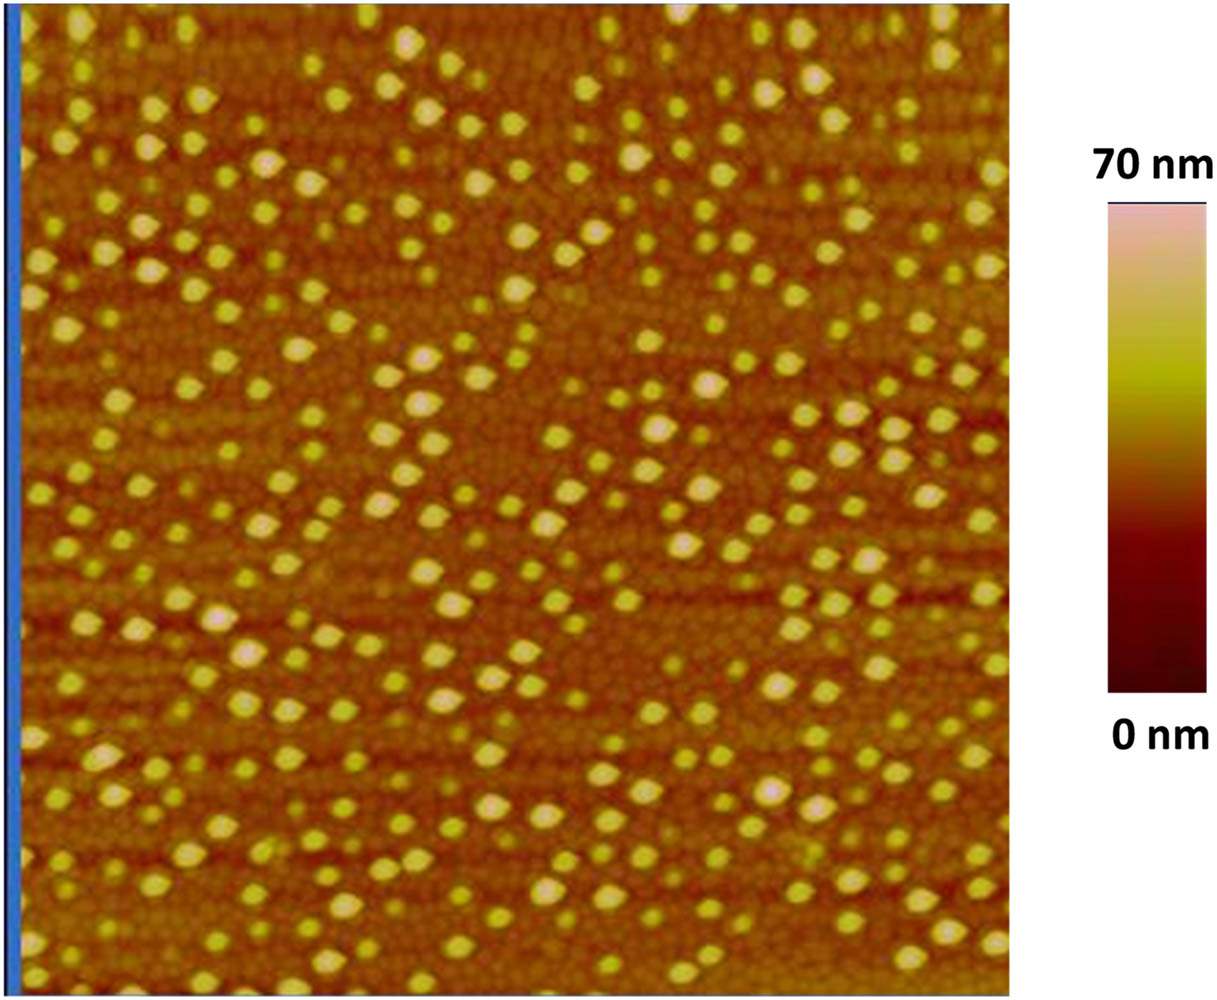 AFM image of GaN nanodots after size reduction and prior to AlGaN barrier overgrowth. The image size is 2 μm×2 μm.